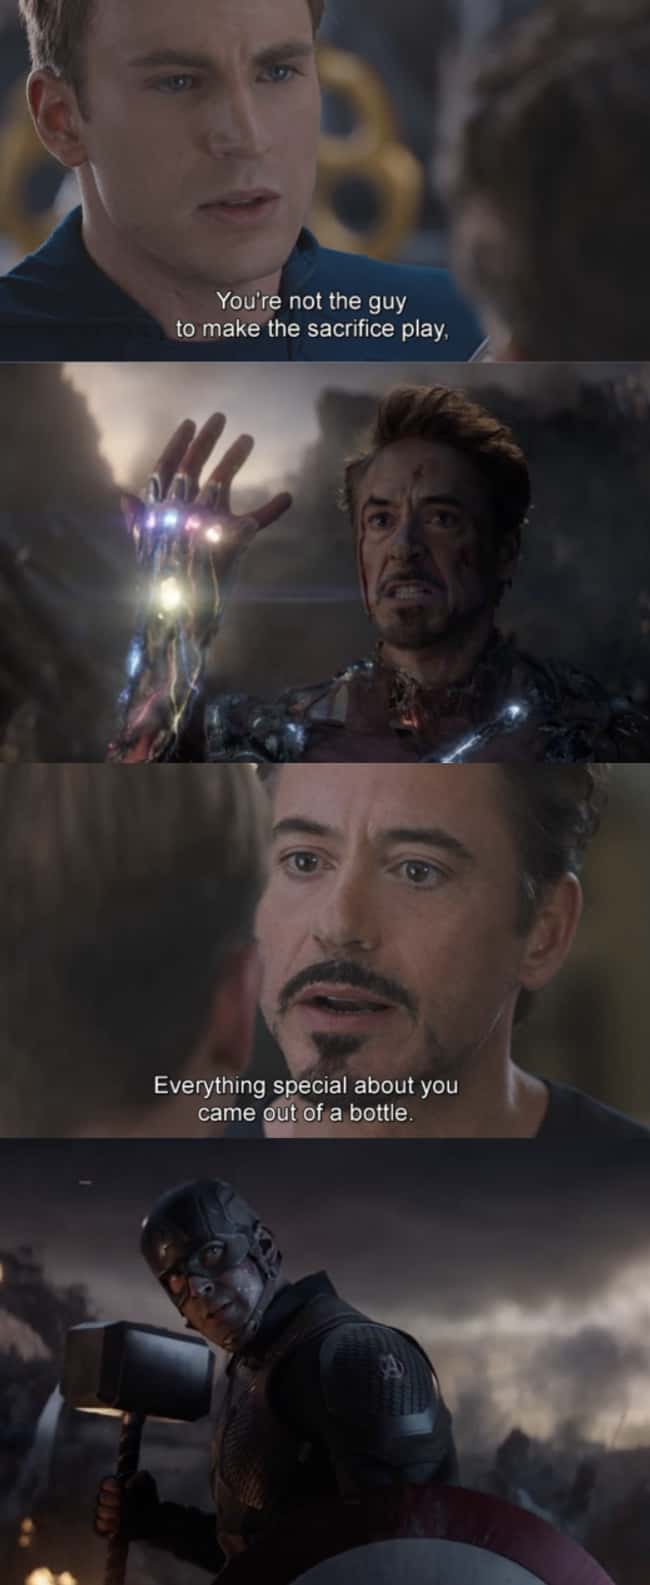 In Endgame, both Steve and Tony's criticisms from Avengers proved wrong.